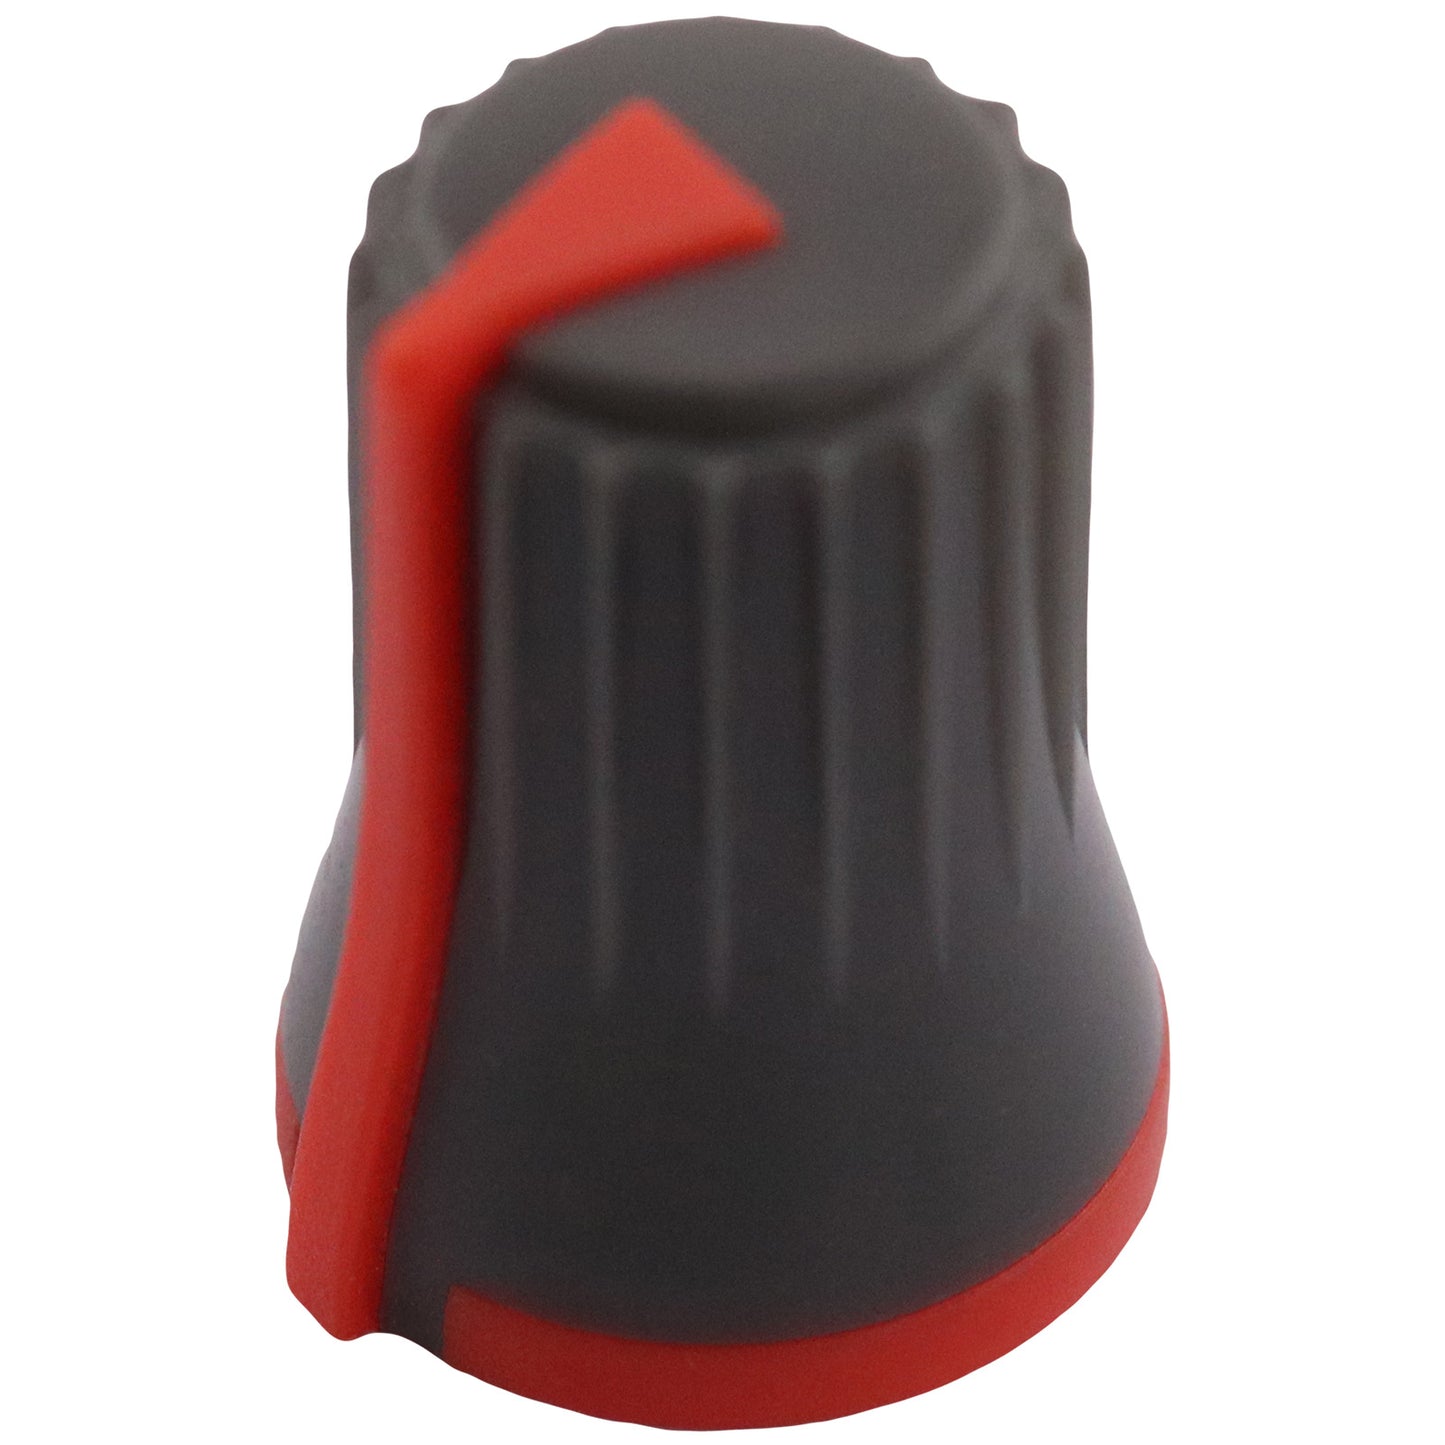 Grey Body Mixer Control Knob With Coloured Position Indicator